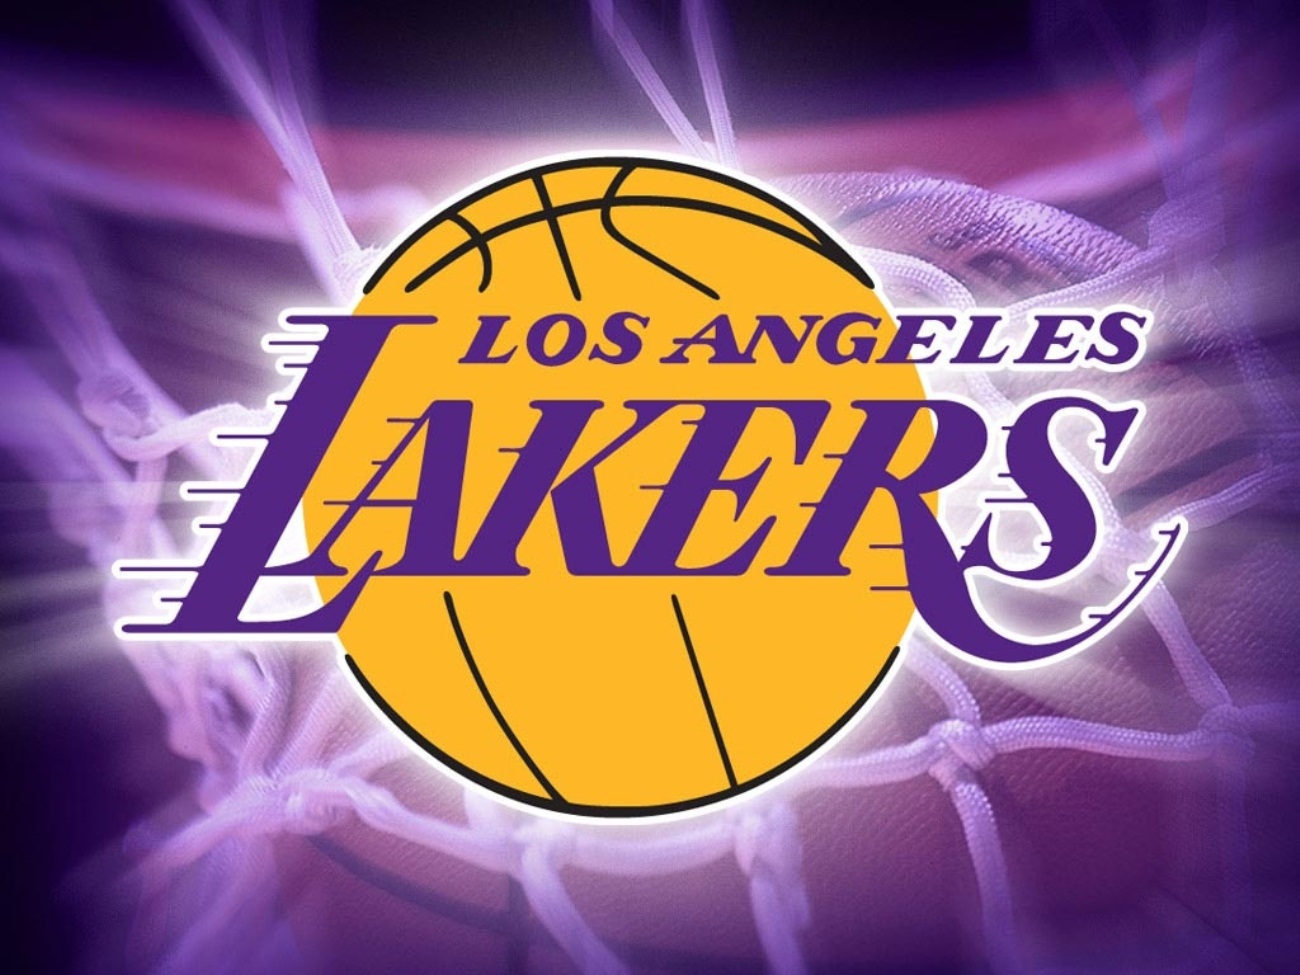 Los Angeles Lakers Logo Wallpaper Photos Of Show Your Basketball Pride